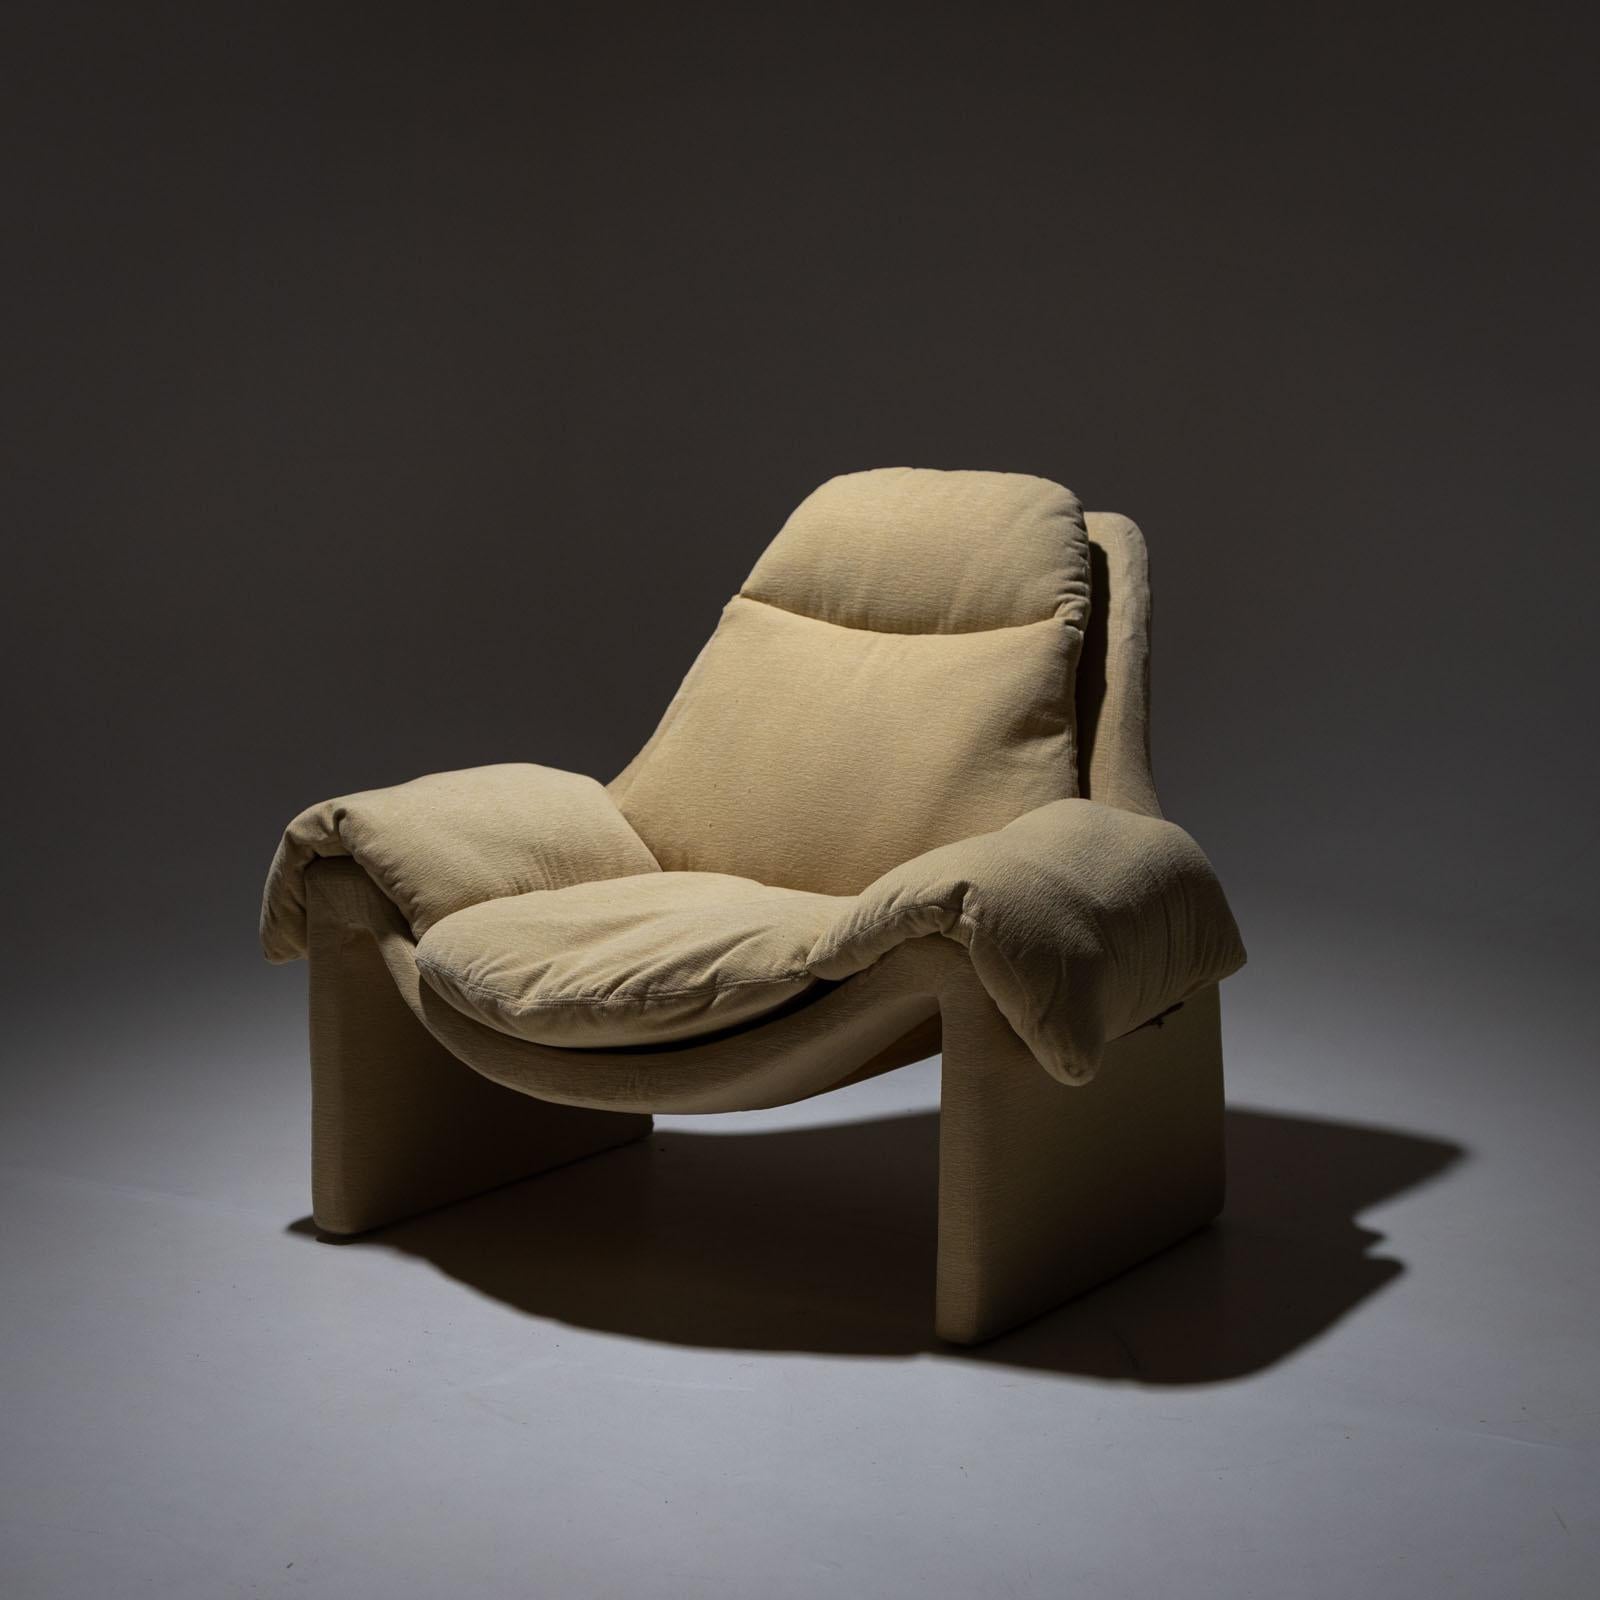 P60 lounge chair with beige cover. The armchair was first designed by Vittorio Introini for Saporiti in the 1960s. The cover is in good condition.